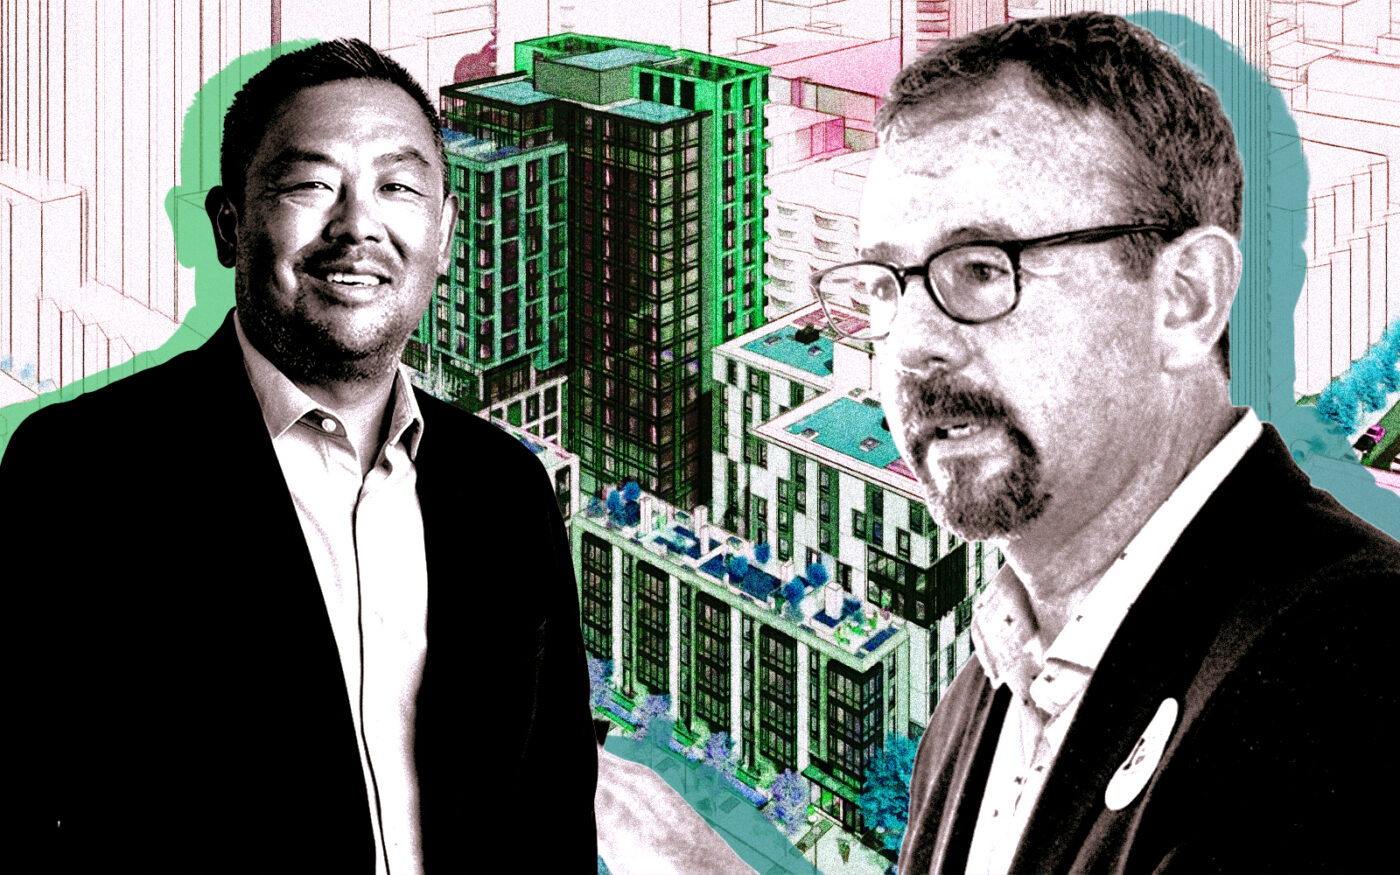 From left: Chinatown Community Development Center's Malcolm Yeung and Mercy Housing California's Doug Shoemaker along with a rendering of 200 Folsom Street in San Francisco (Getty, Kennerly Architecture & Planning, Mithun, Chinatown Community Development Center, Mercy Housing California)